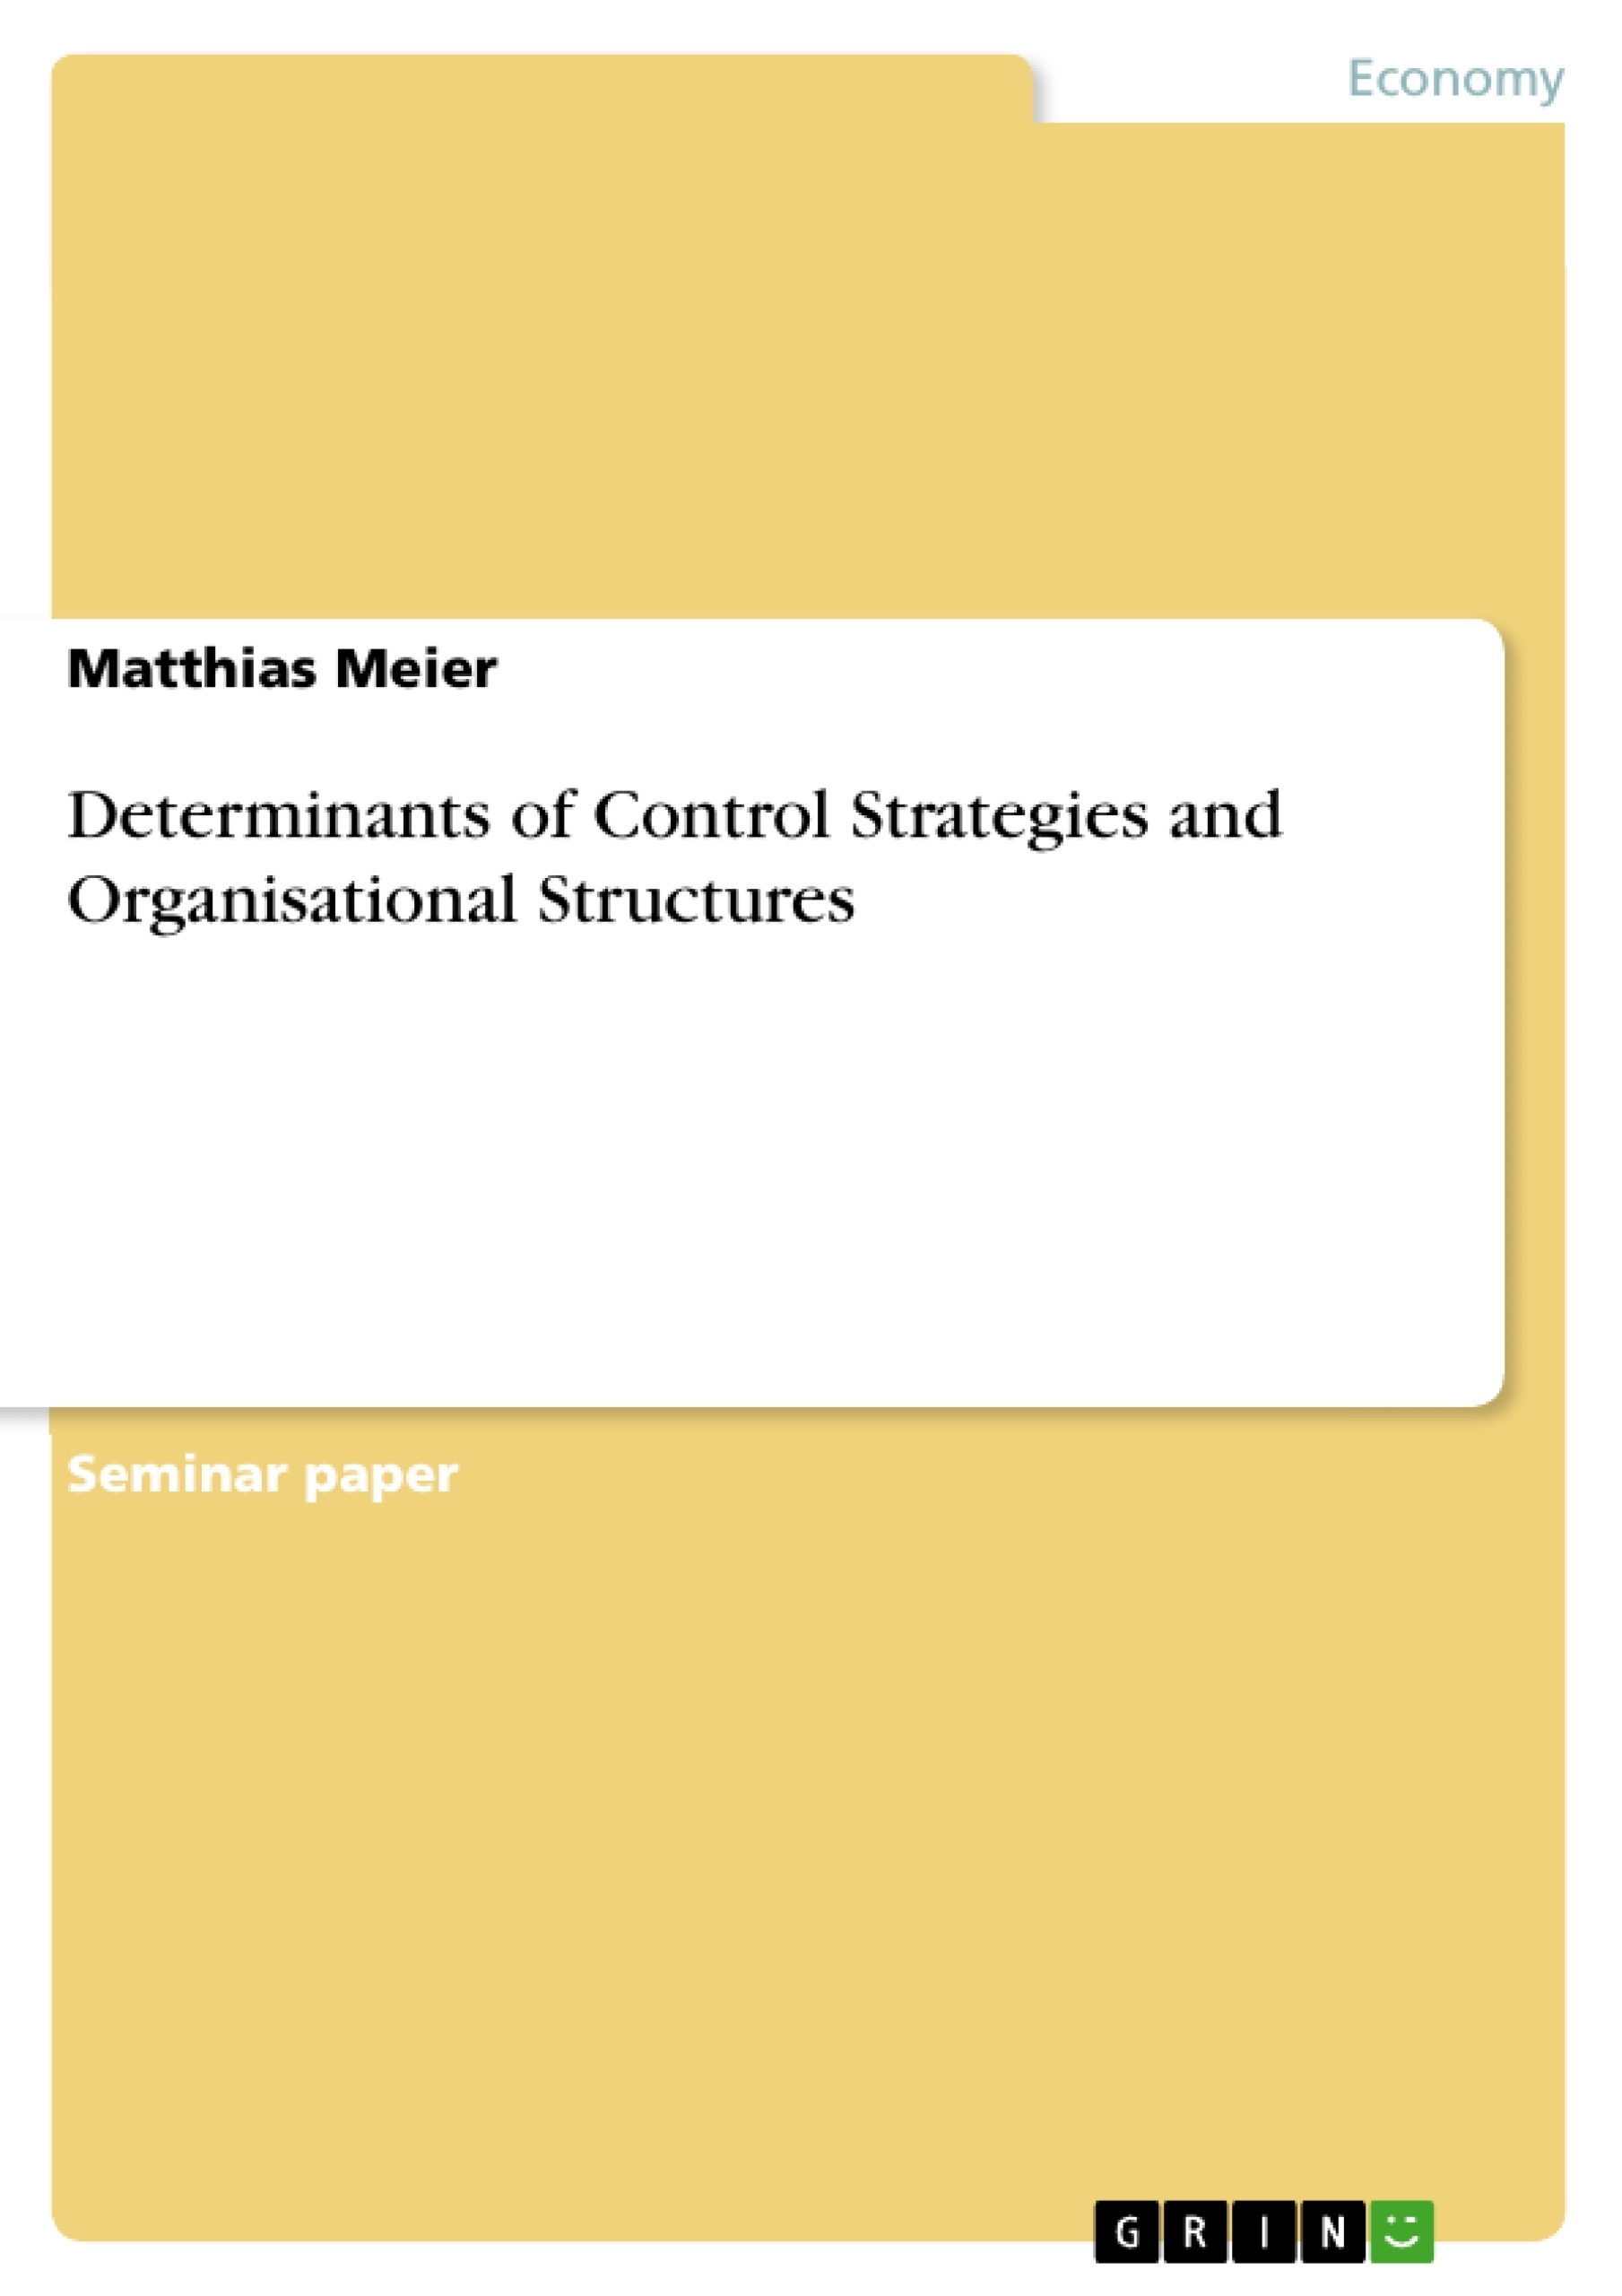 Title: Determinants of Control Strategies and Organisational Structures